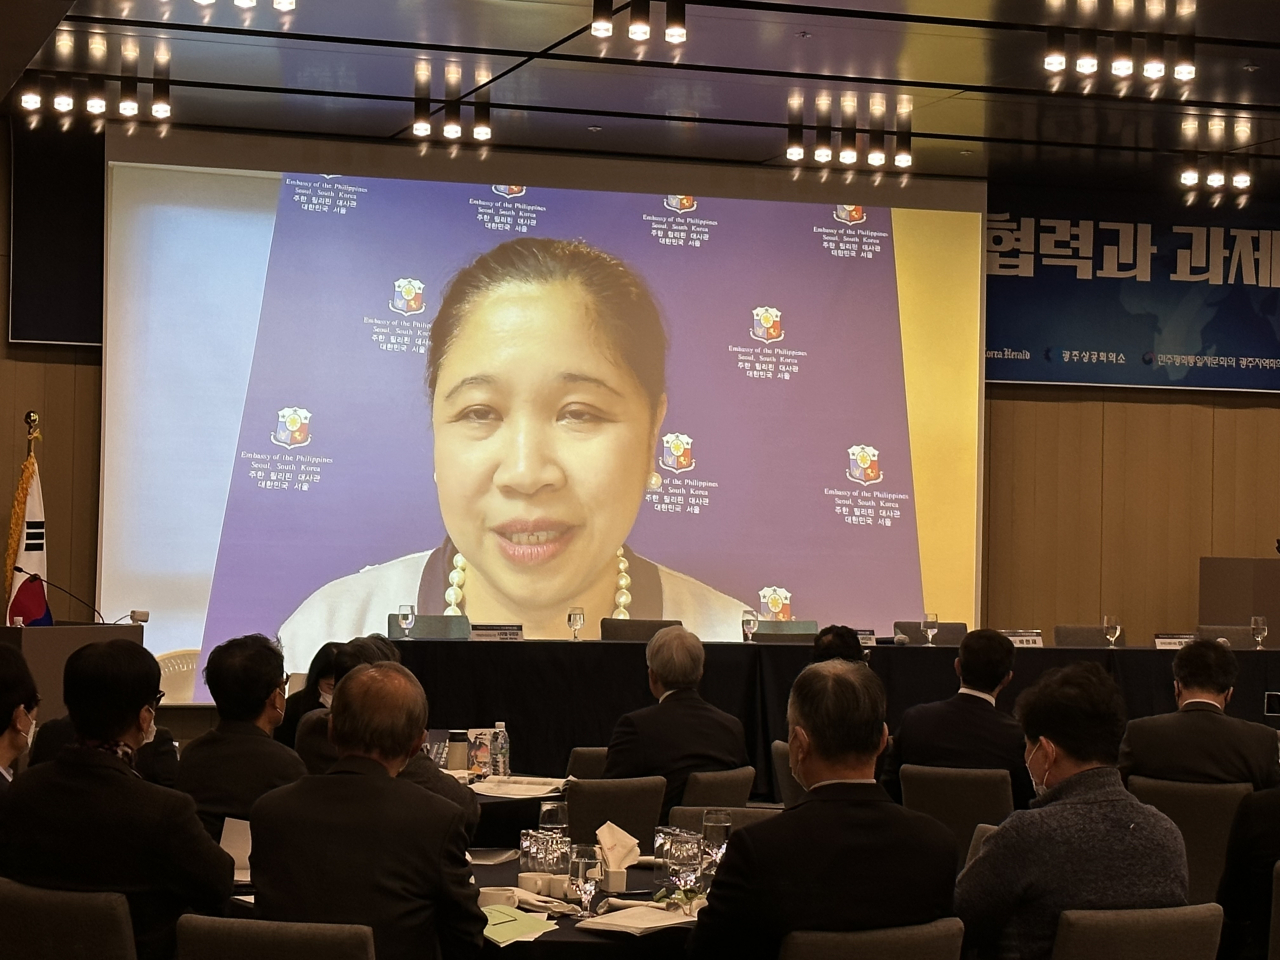 Philippine Ambassador to Korea Theresa Dizon-De Vega delivers a video message highlighting bilateral prospects at the 2022 Asia 100 Years Forum co-hosted by the Northern Economic and Cultural Center and The Korea Herald at Ramada hotel in Gwangju on Friday. (Northern Economic and Cultural Center)